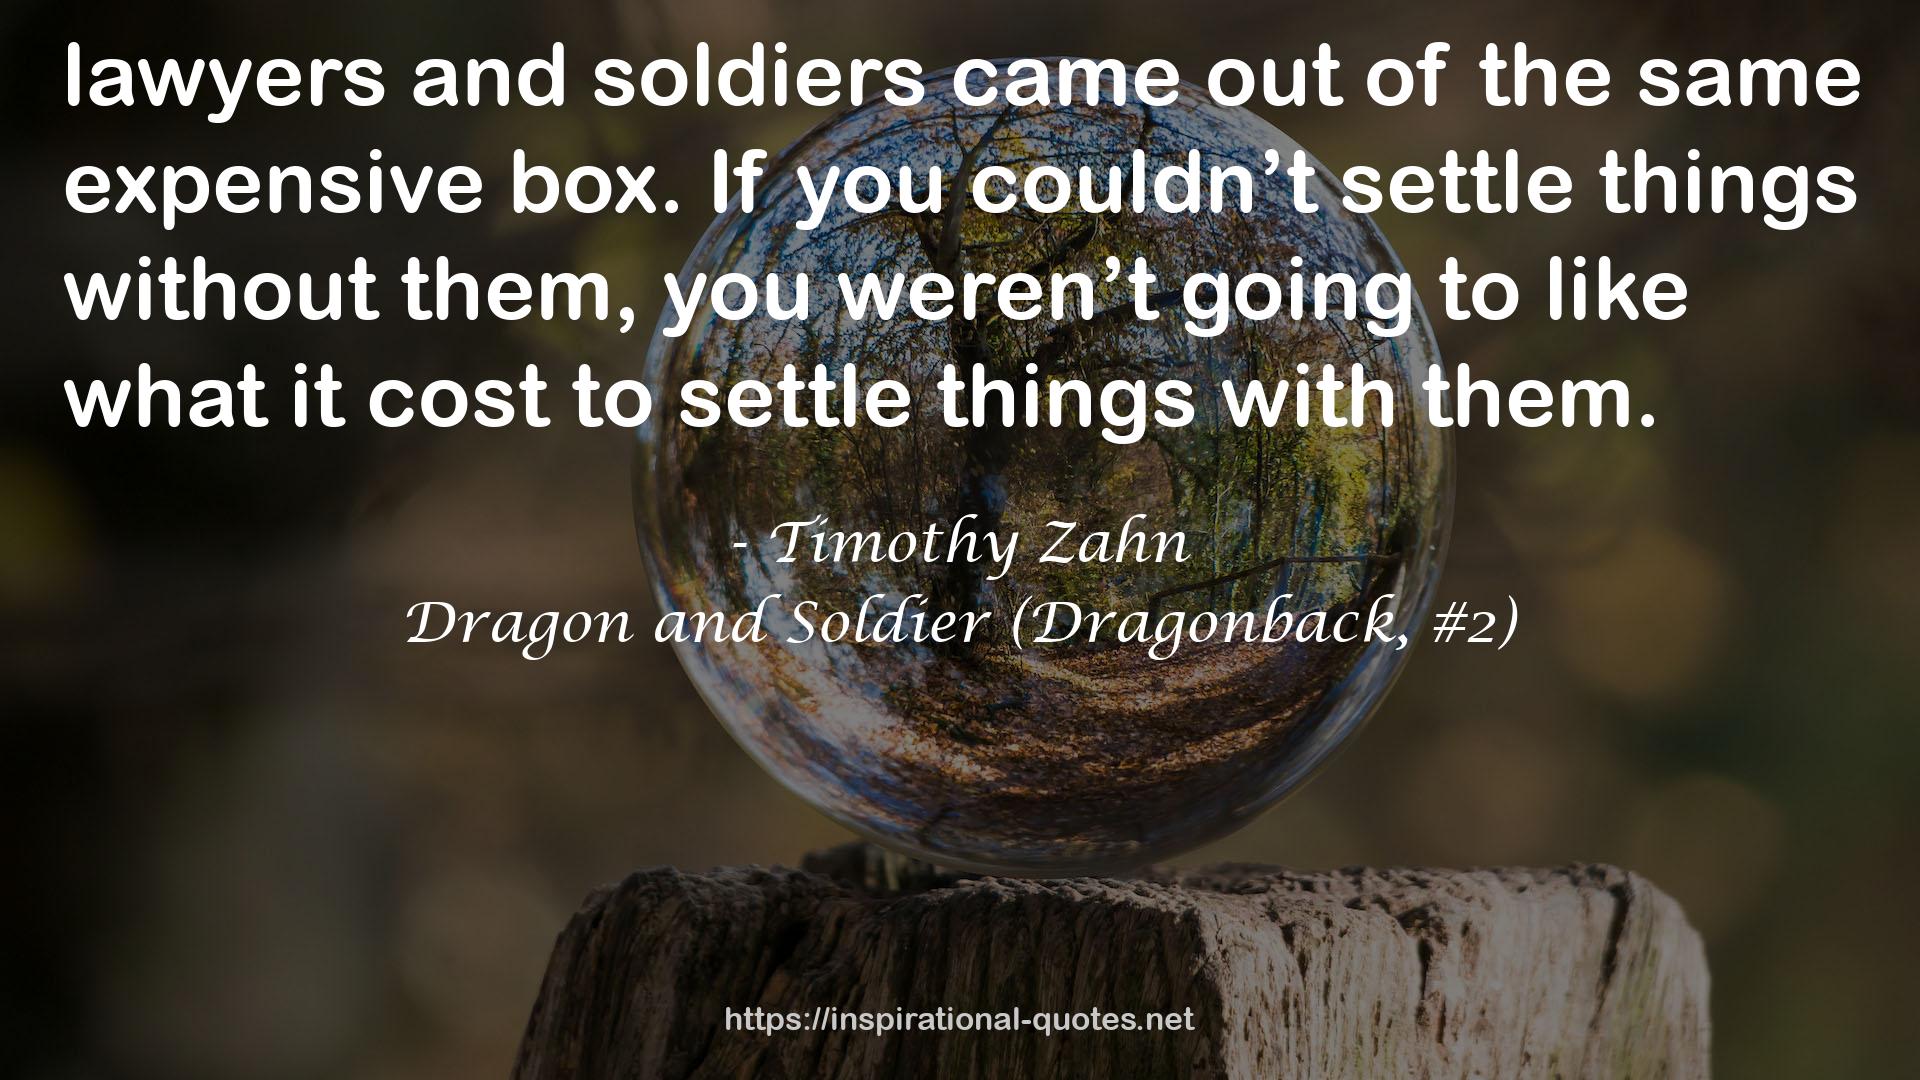 Dragon and Soldier (Dragonback, #2) QUOTES